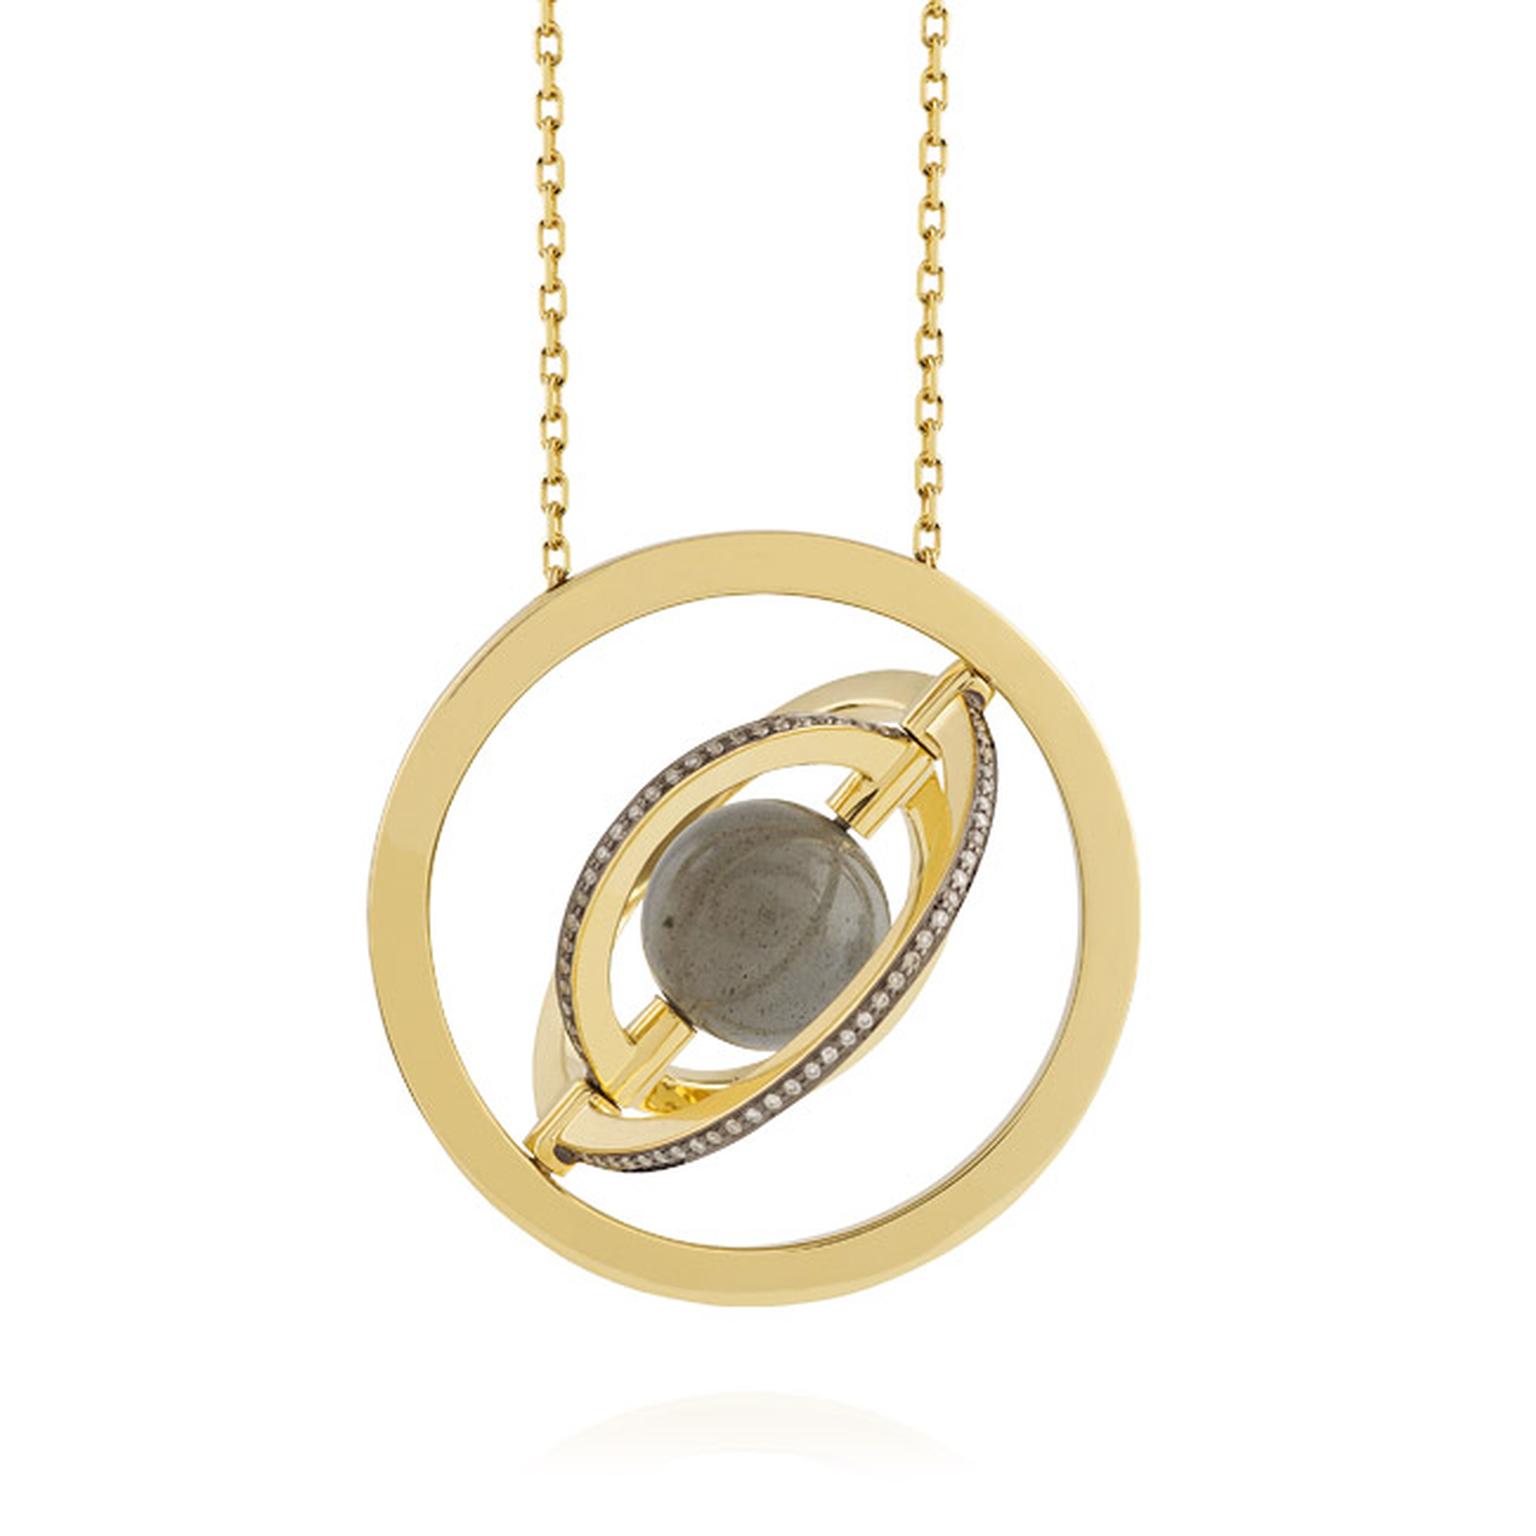 Noor Fares Urania pendant with a centre 7.17ct labradorite sphere surrounded by a rotating setting of three rings of yellow gold and diamonds